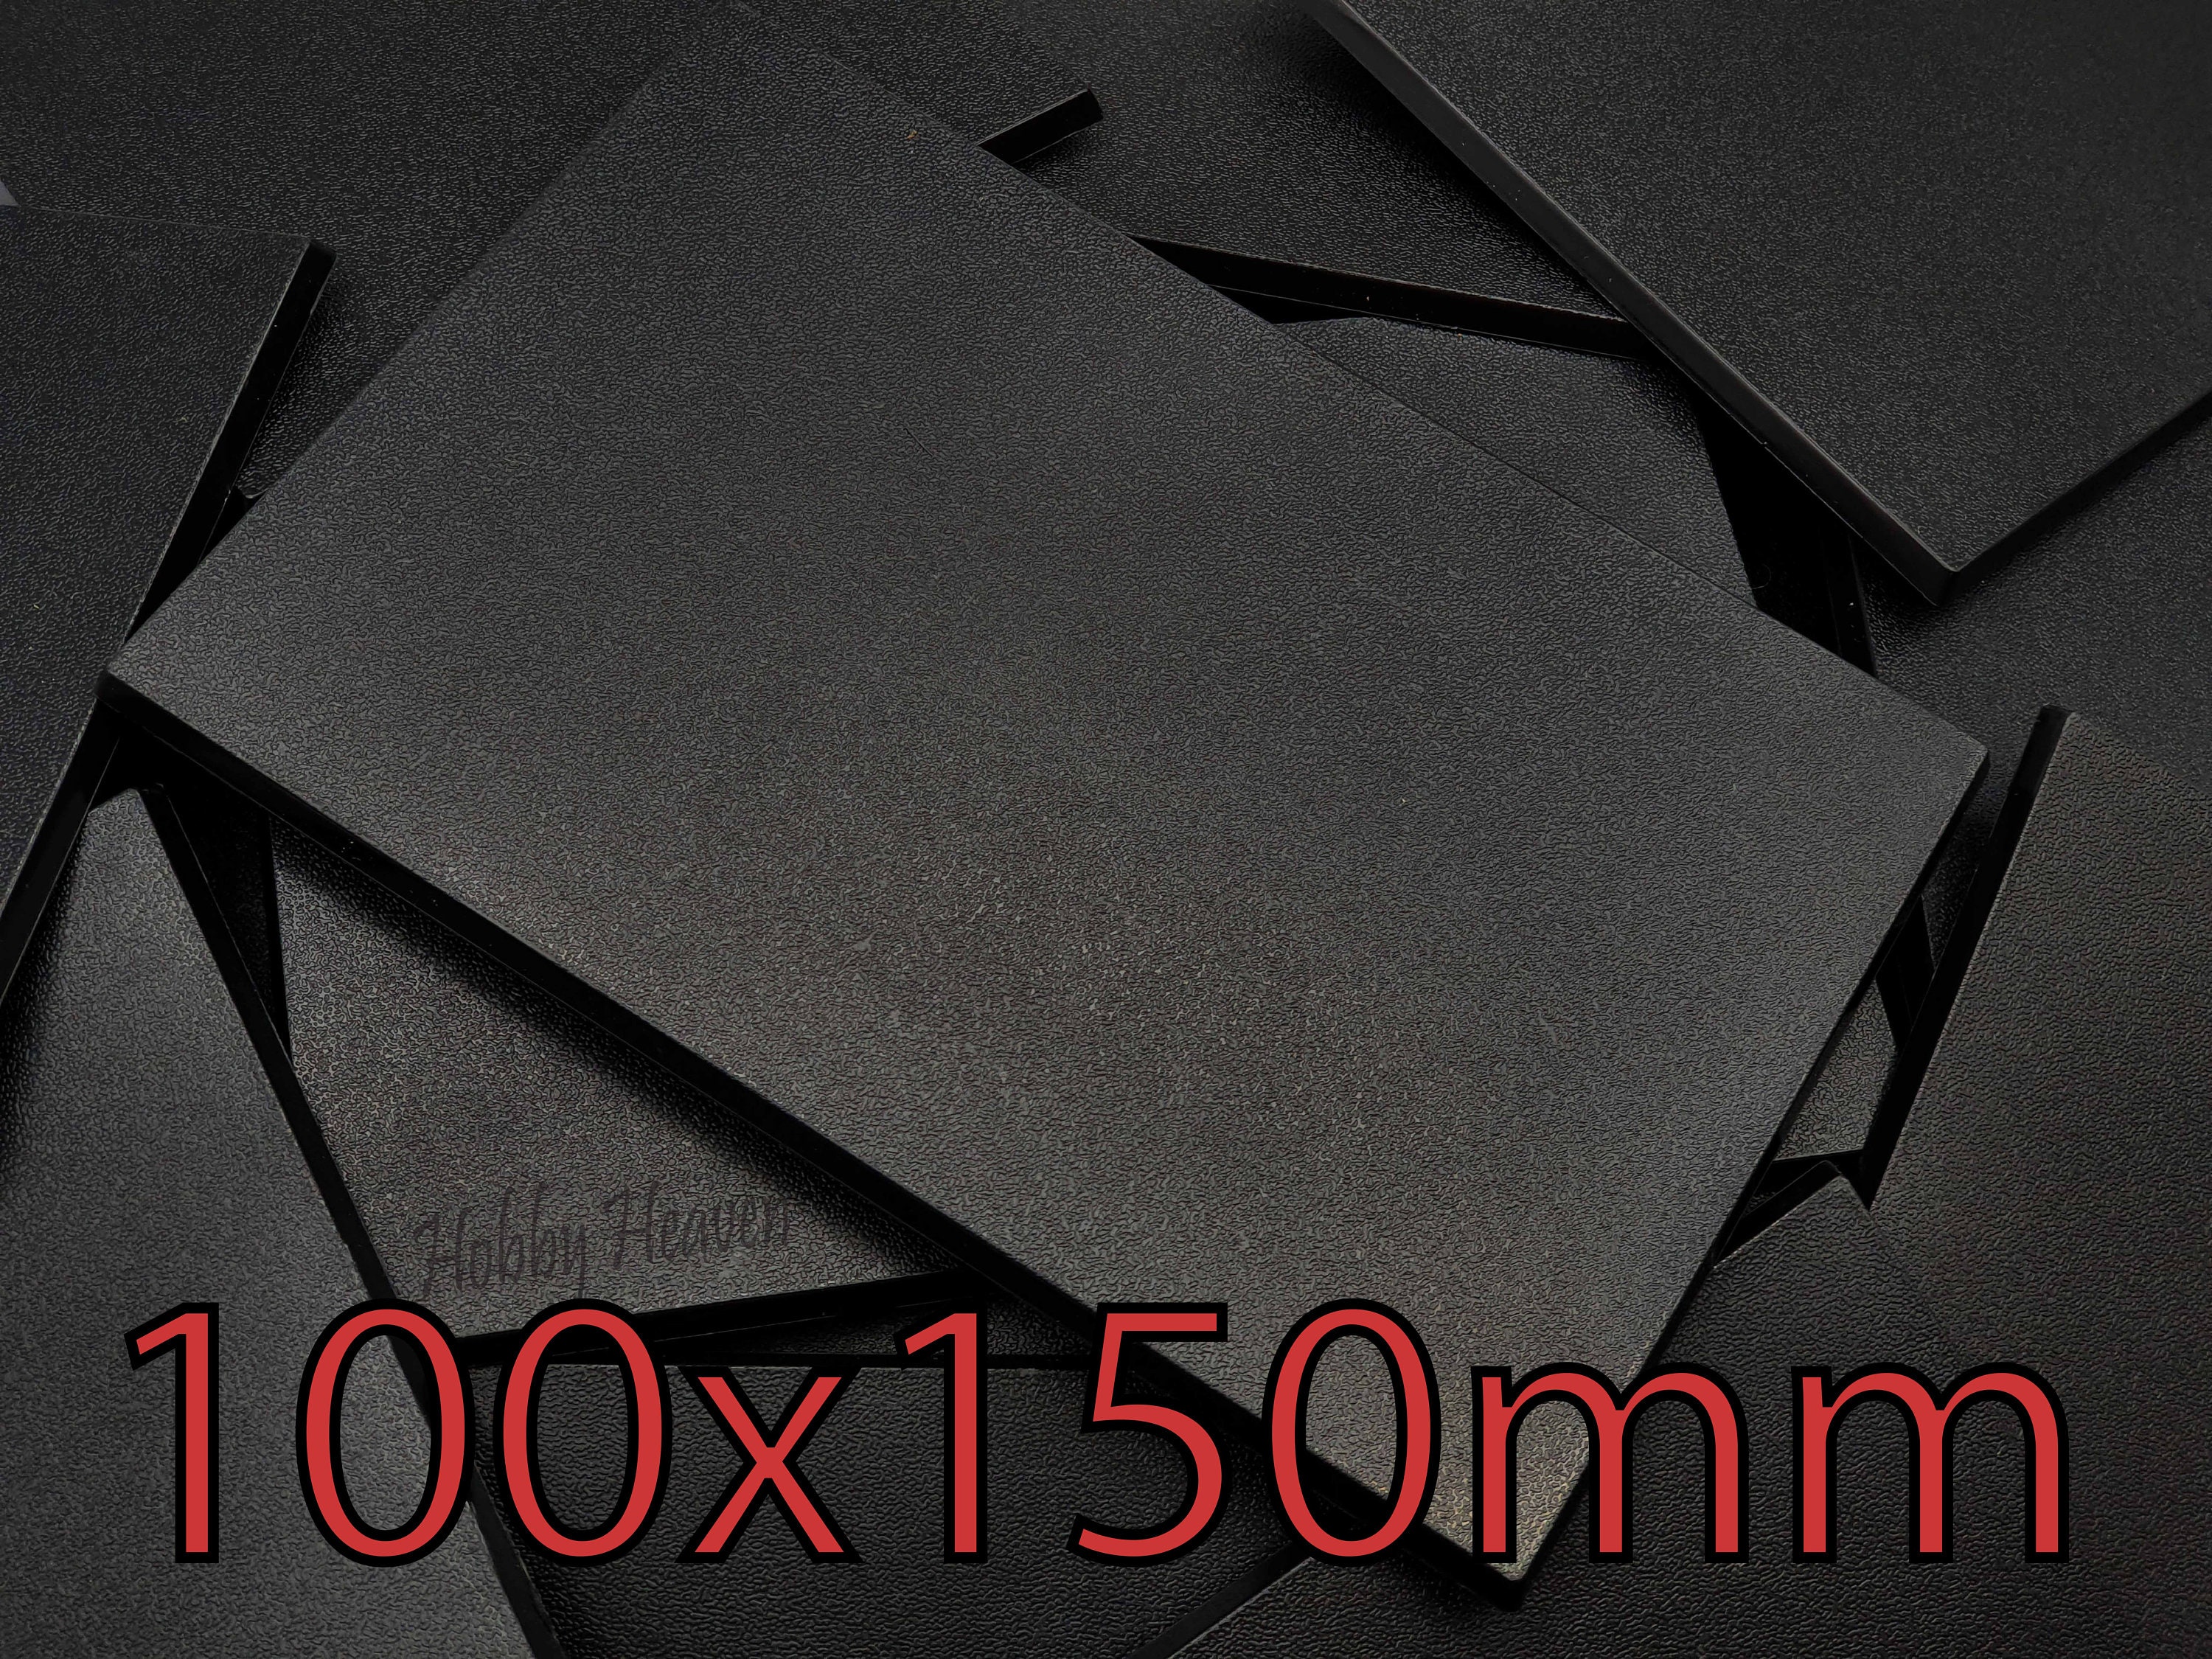 150X100MM Brown Paper Cardboard Blank 24 Pieces/Lot with Shipping